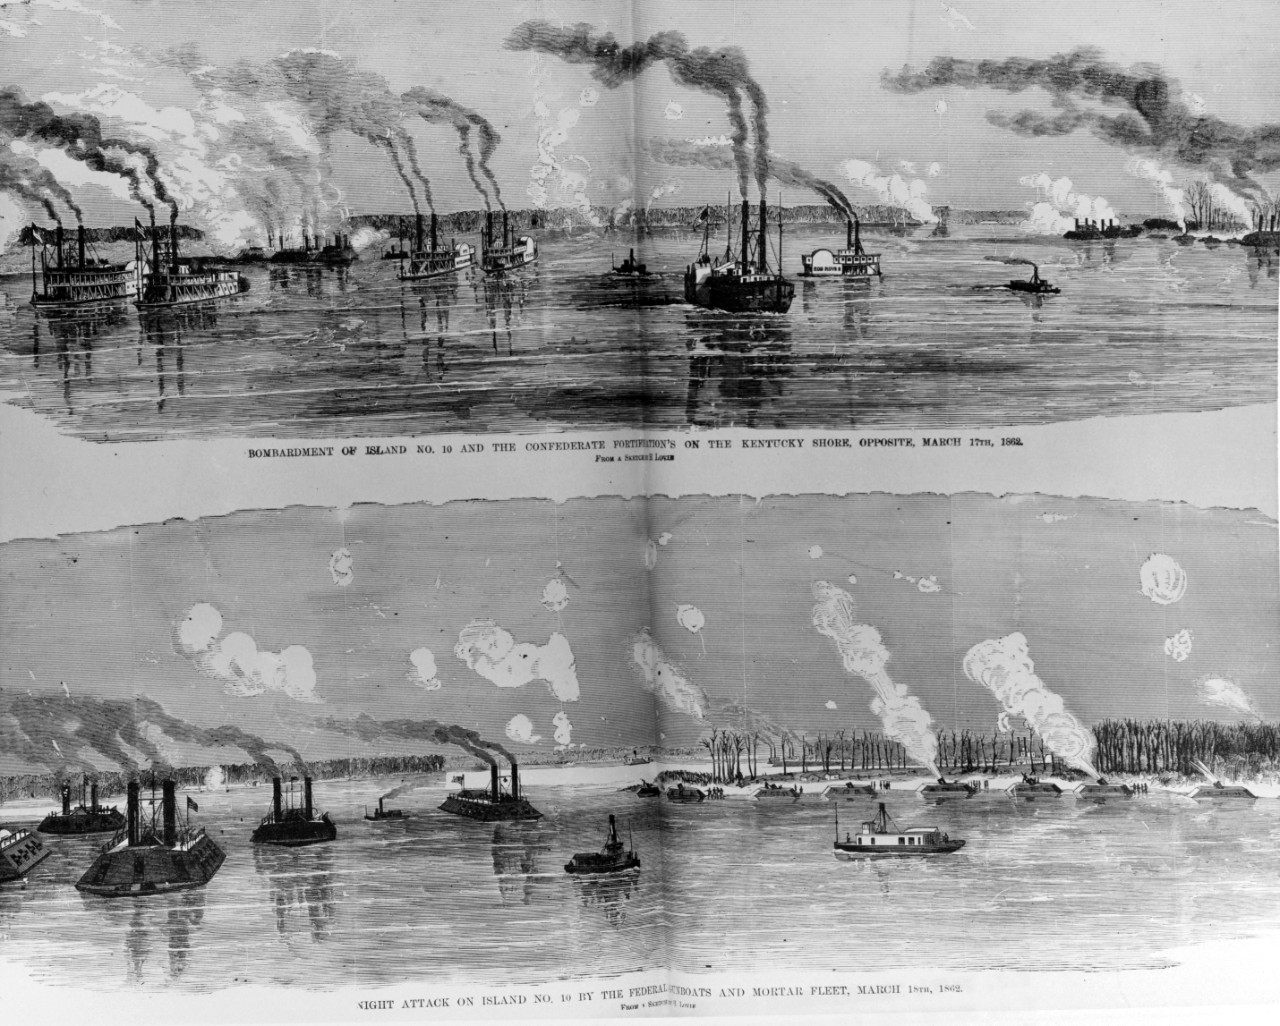 Top: Bombardment of Island Number Ten and Confederate Fortifications in Kentucky on 17 March 1862